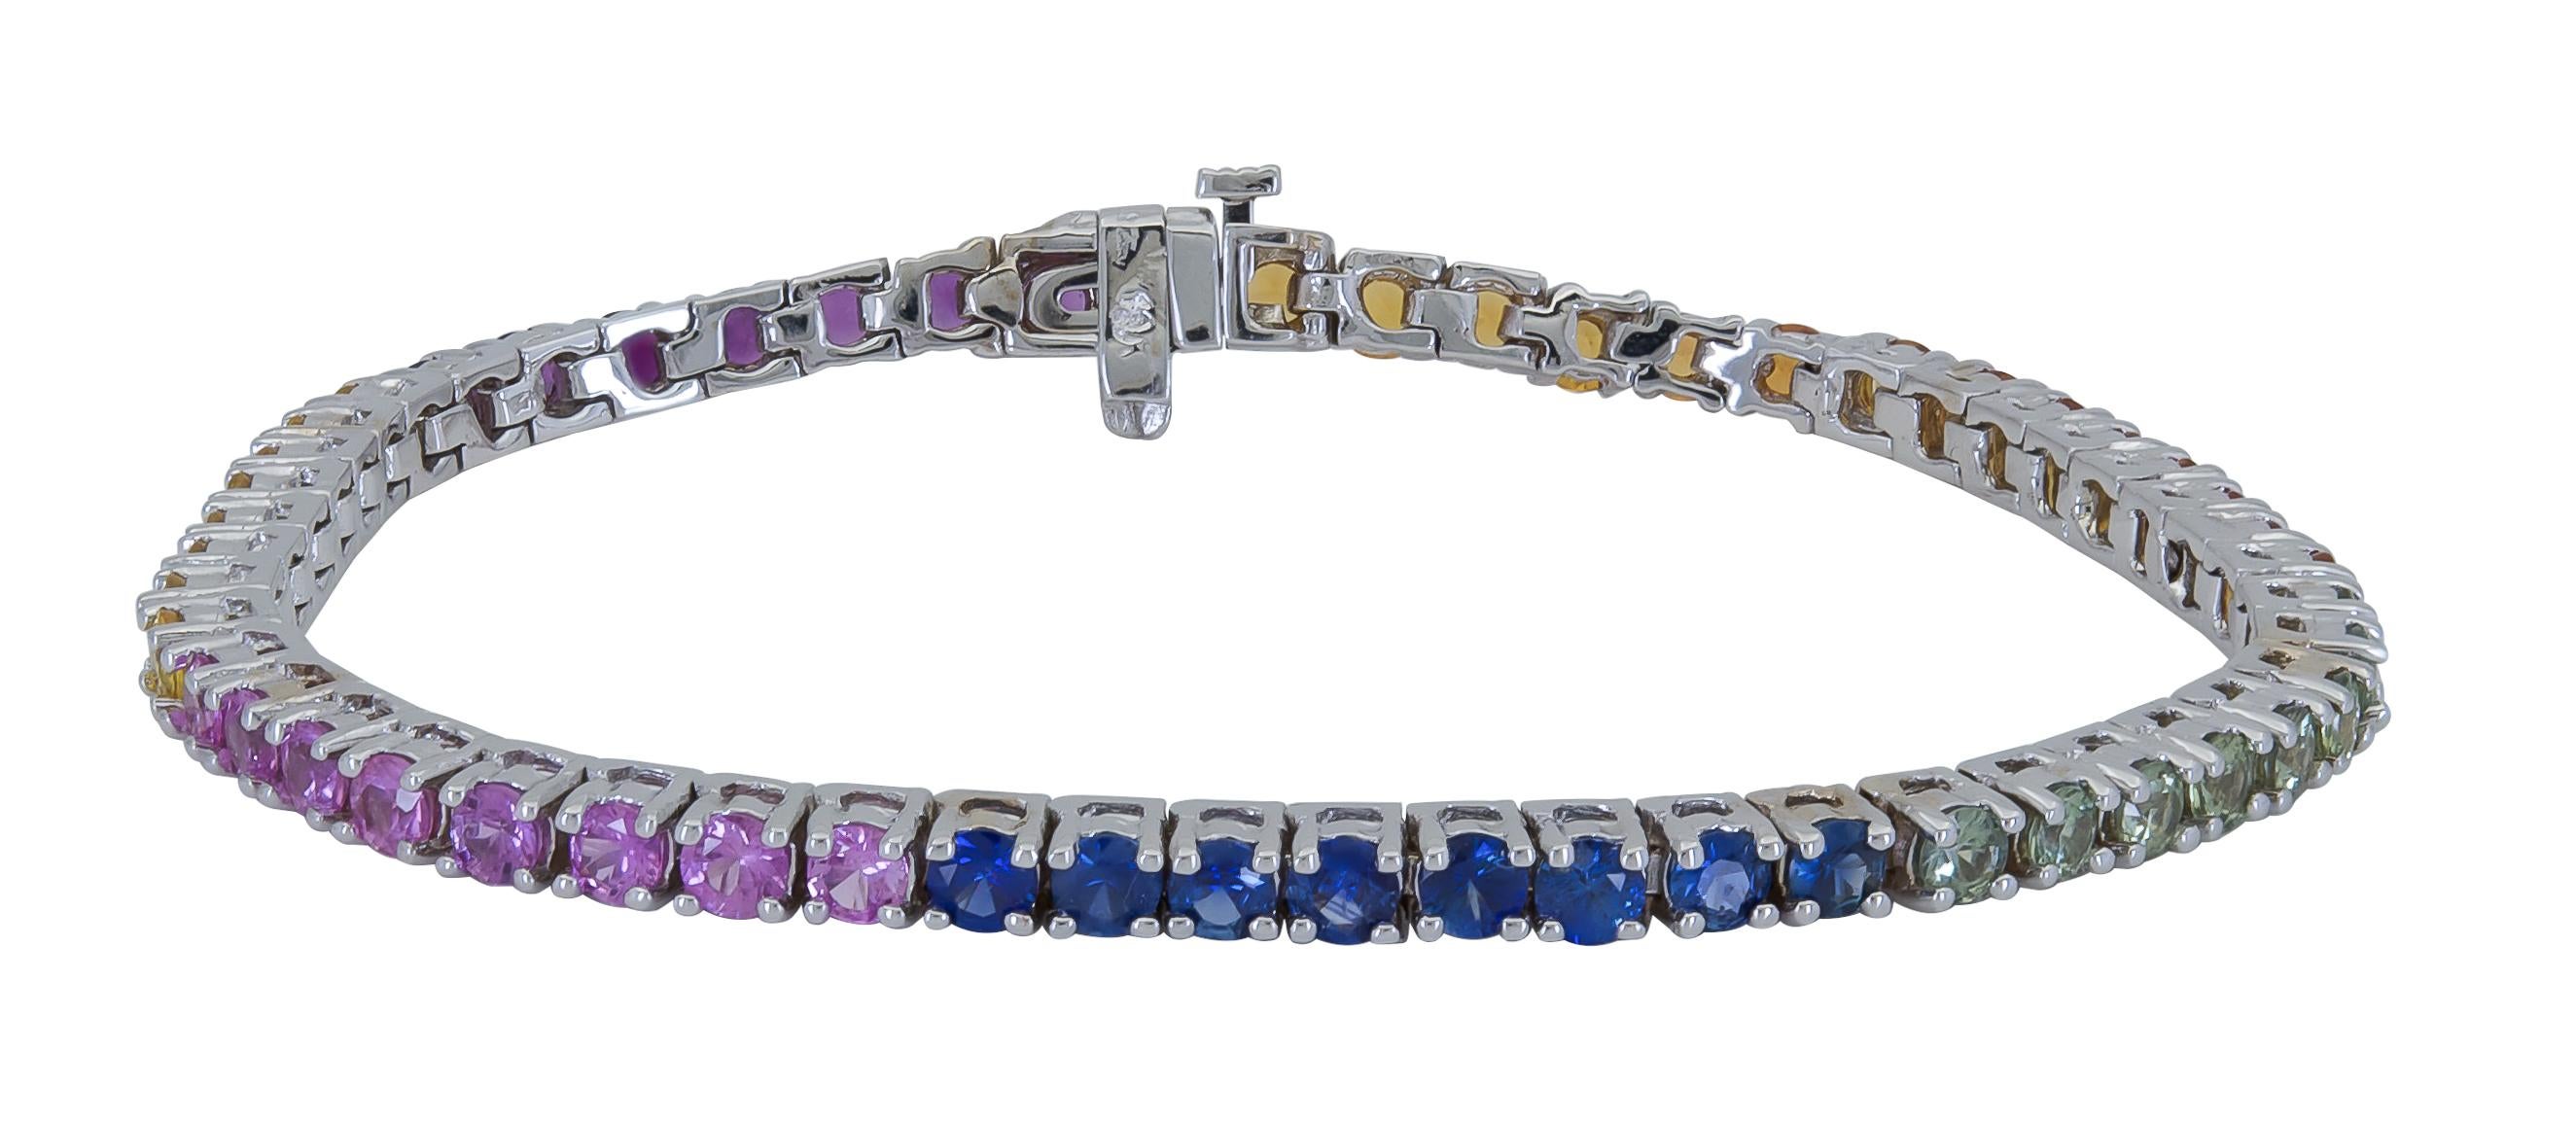 Features a row of vibrant round sapphires of different colors, set in a four prong tennis design. A chic and fashionable piece of jewelry.
Sapphires weigh 8.45 carats total.
Dimensions: 7.25in (L) x 0.13in (W)
Creator: Ely Adams